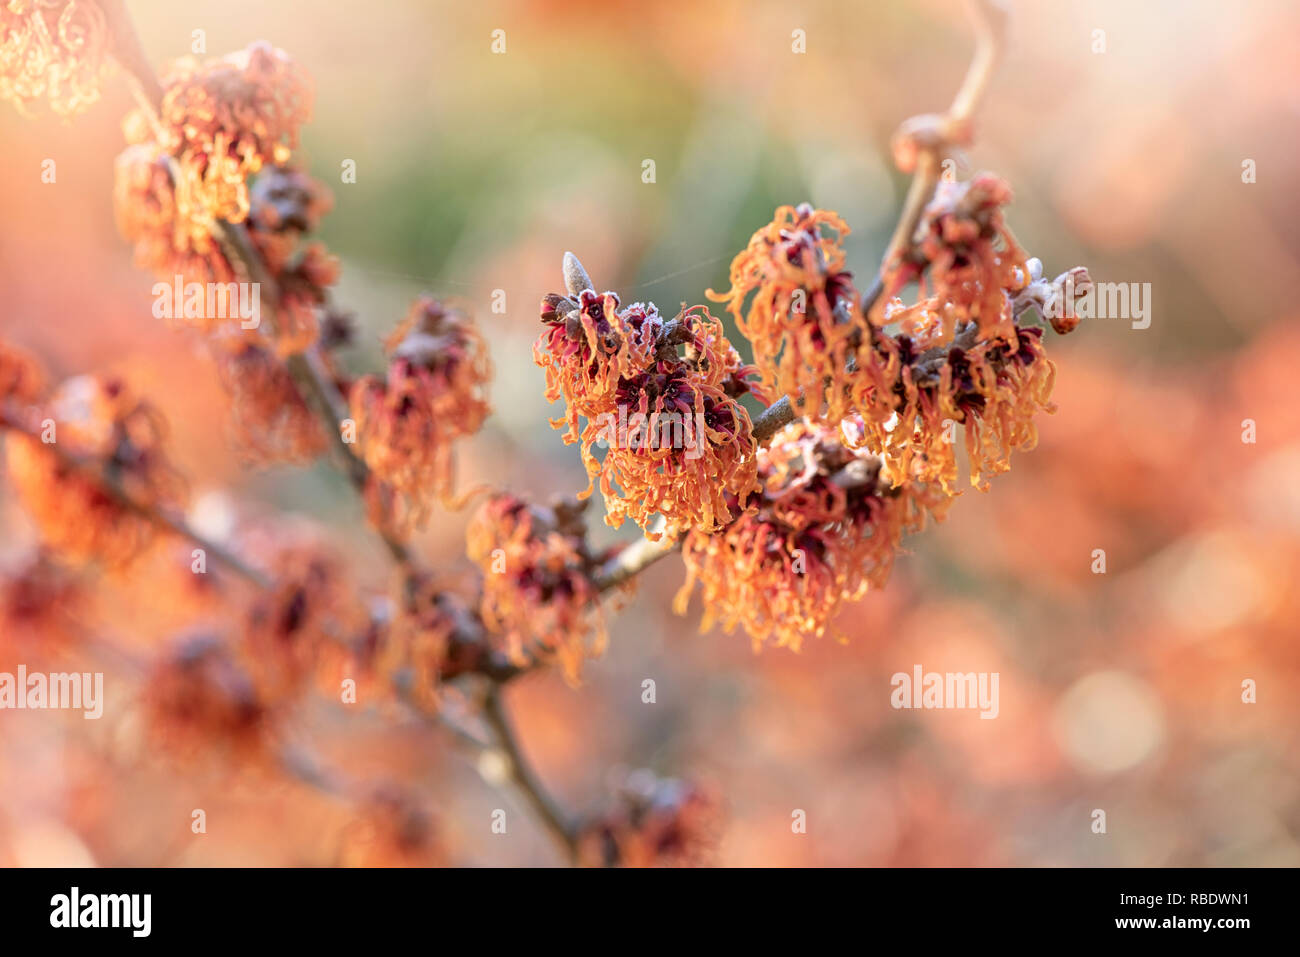 Close-up image of the vibrant coloured, spring/winter flowering Hamamelis shrub also known as Witch Hazel. Stock Photo